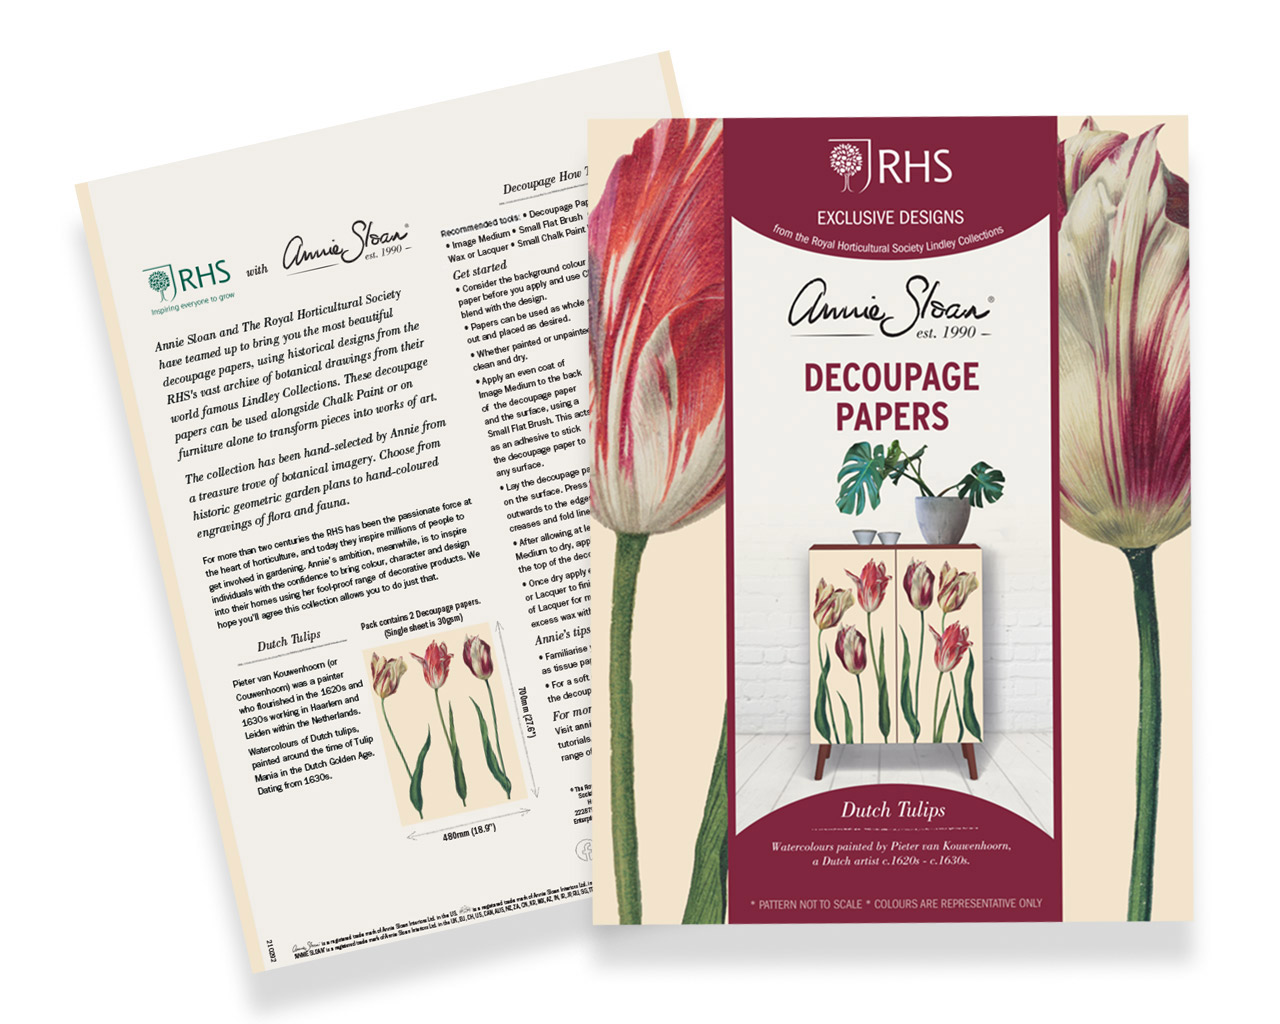 Dutch Tulips decoupage papers by Annie Sloan and RHS - Product shot